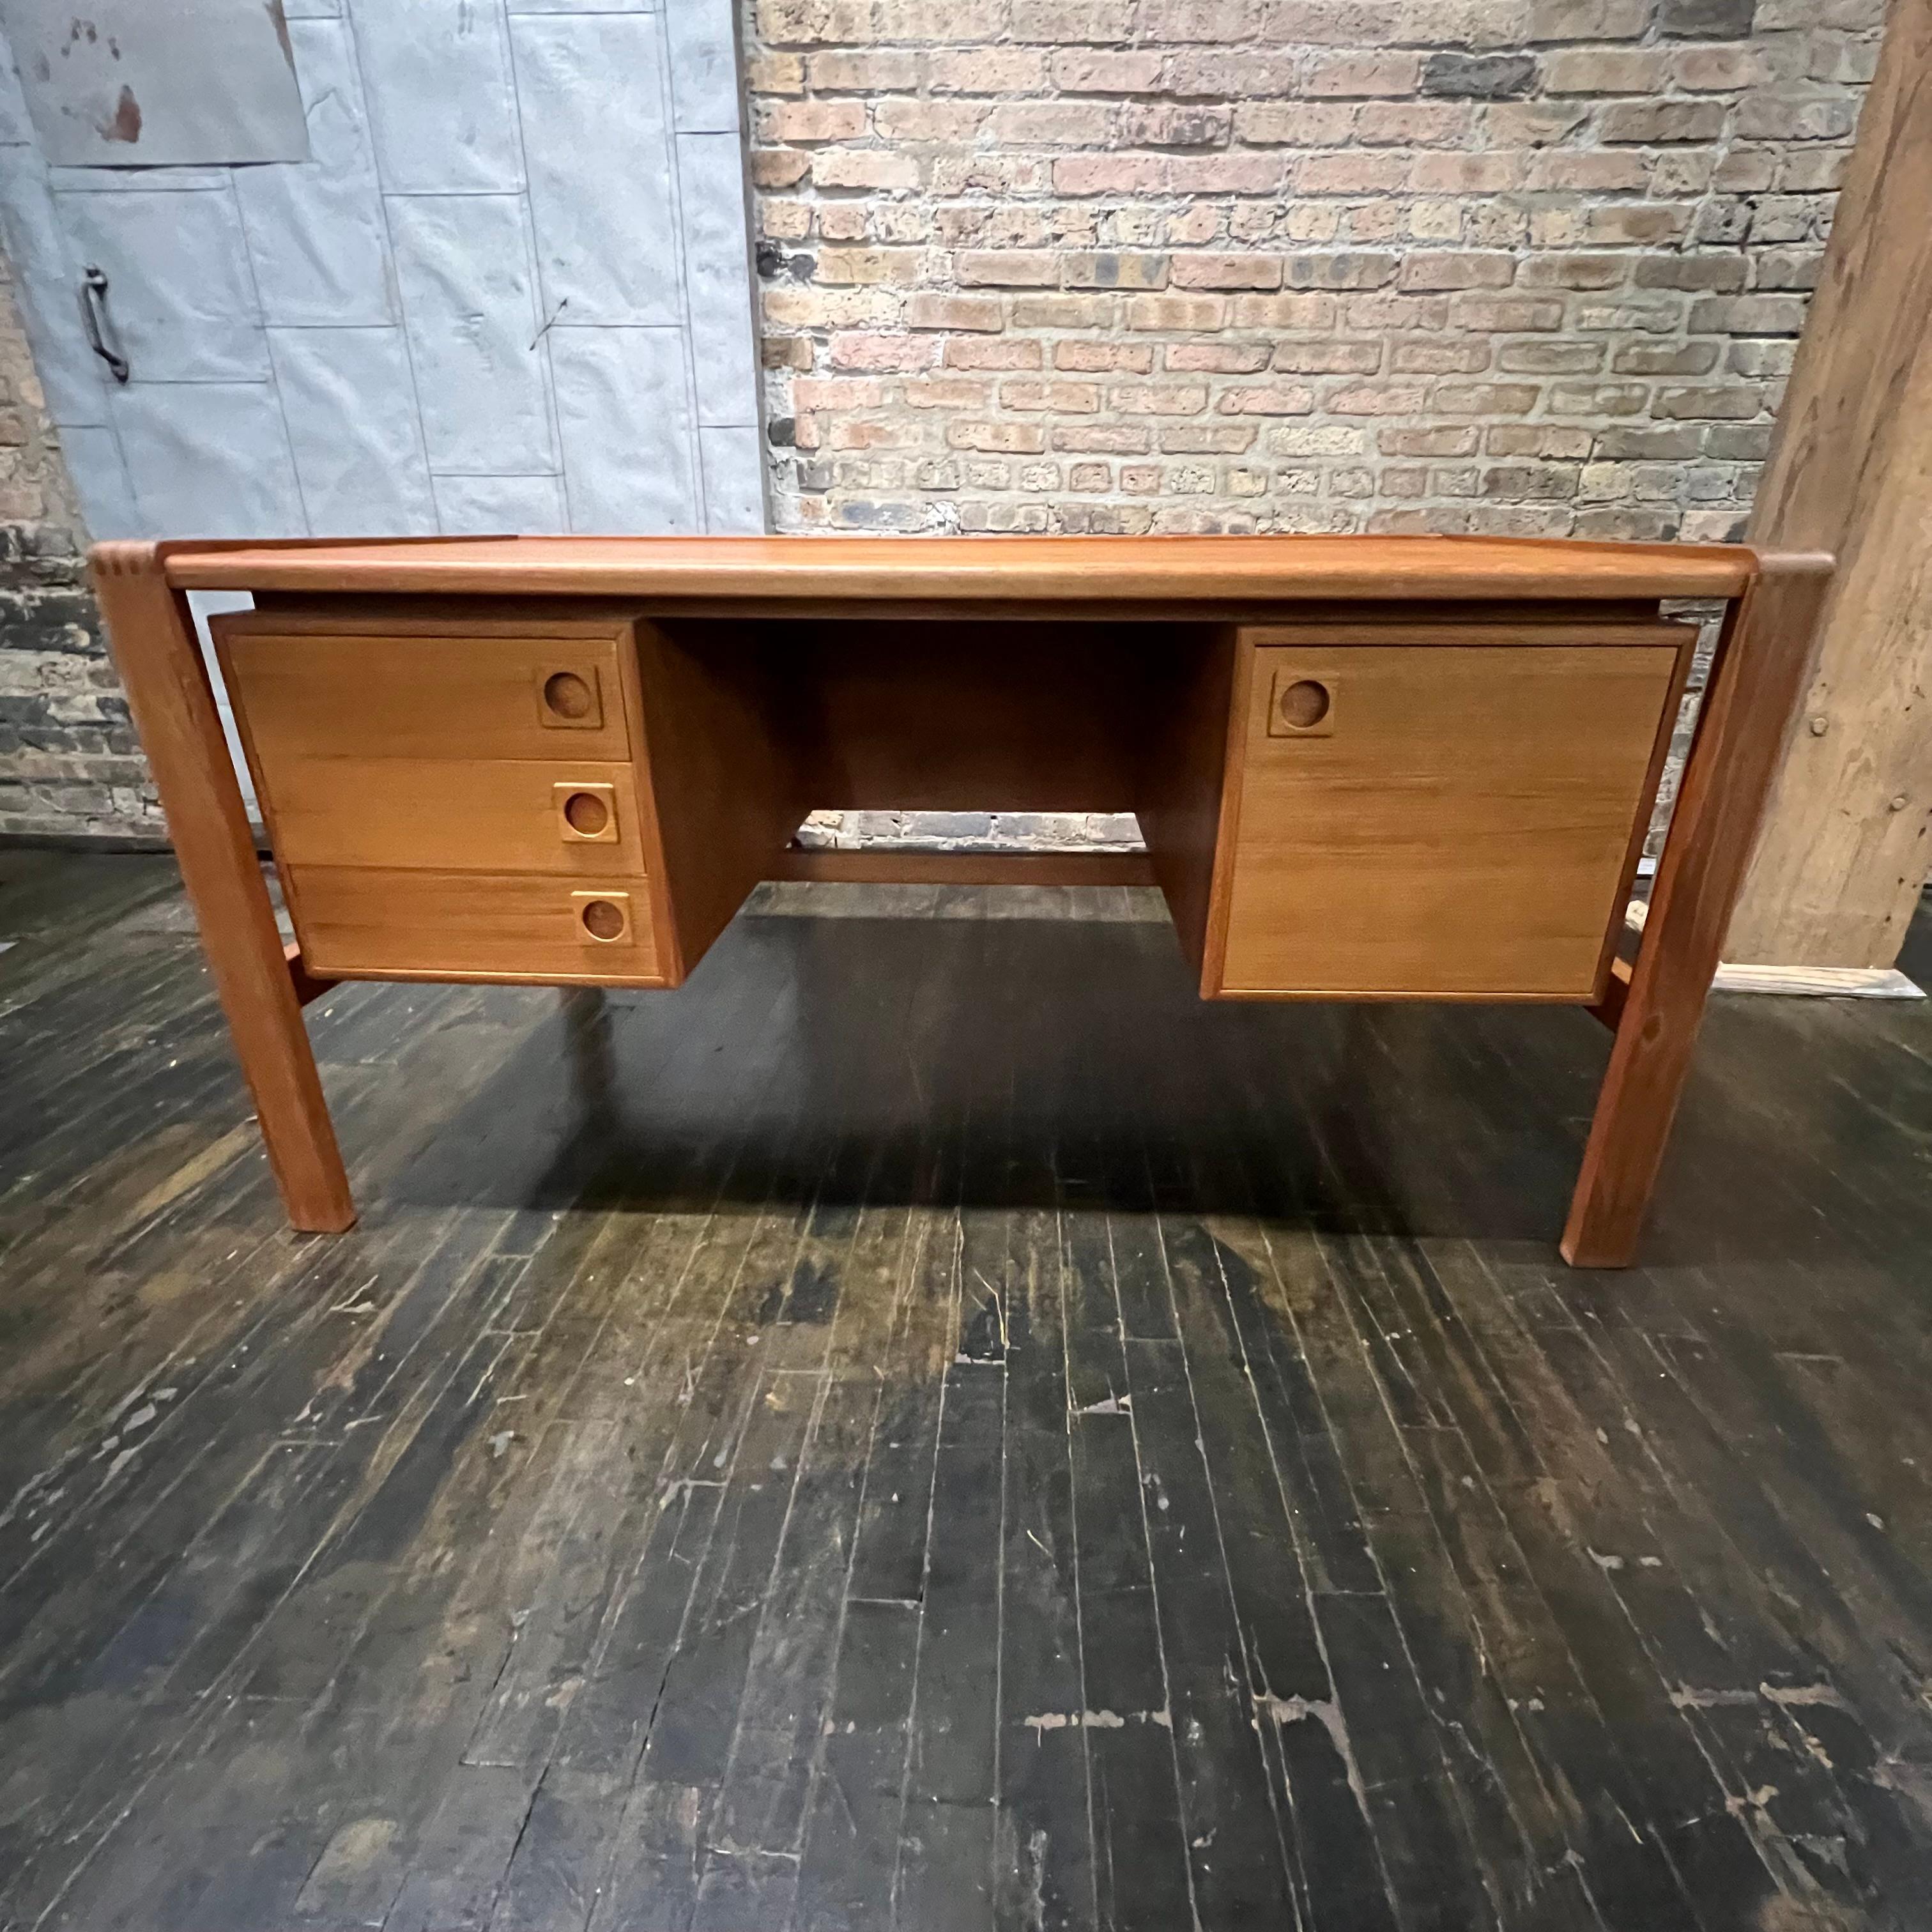 Mid-century executive floating top desk by H.P. Hansen manufactured in Demark circa 1970s. This beautiful desk was made of the highest quality teak.  The grain and color of the wood are outstanding.   It features three shallow dovetail drawers on